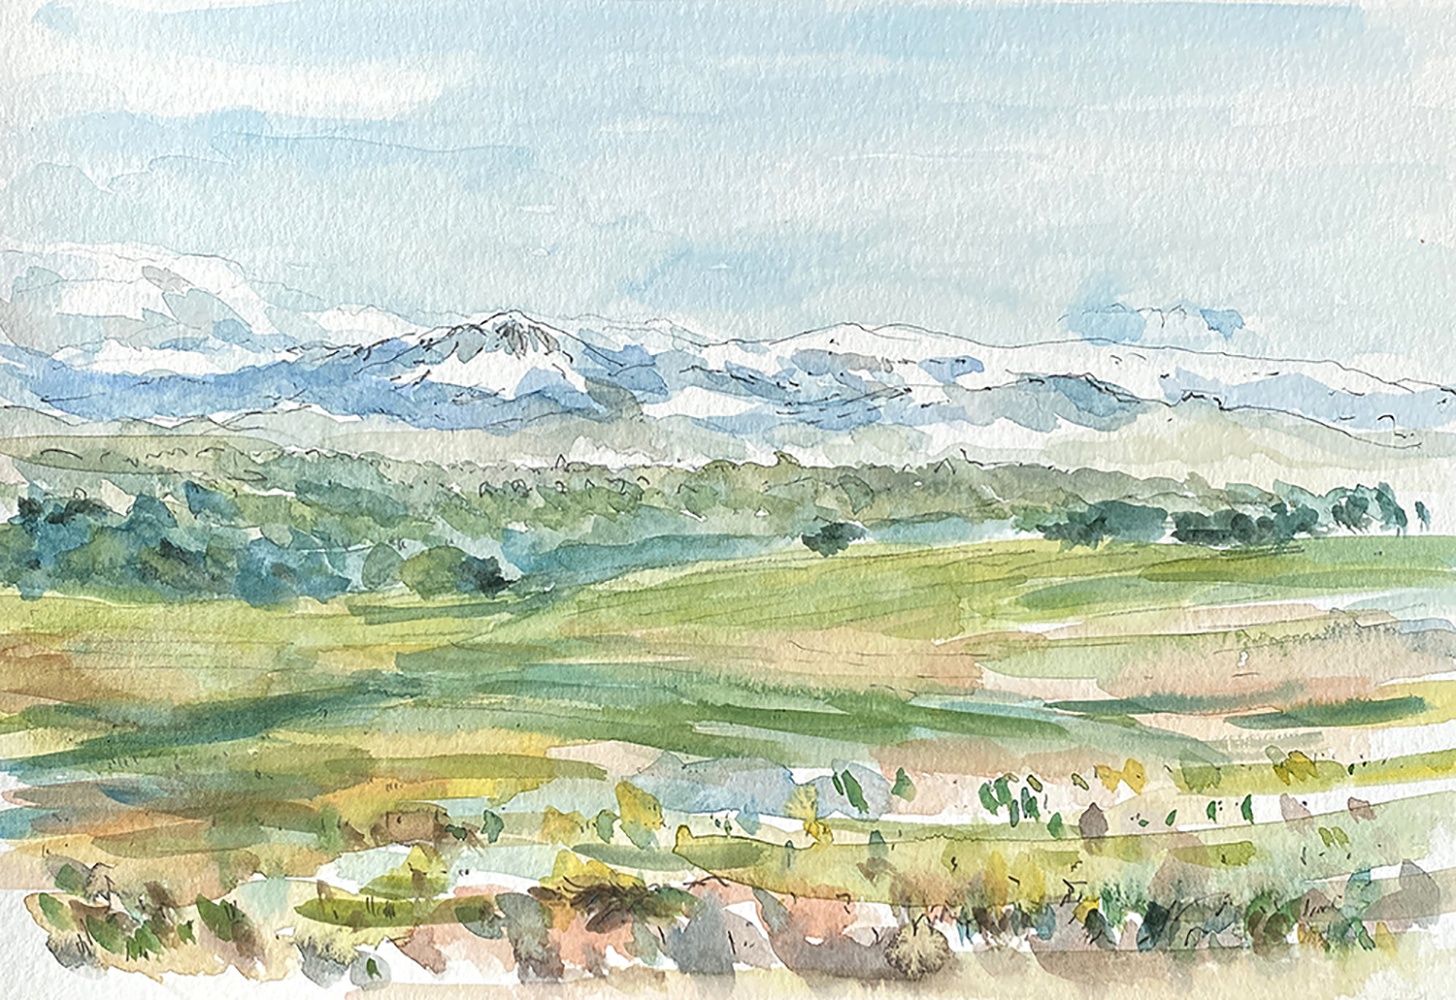 Gredos Mountains view from Boadilla, Spain (2023)